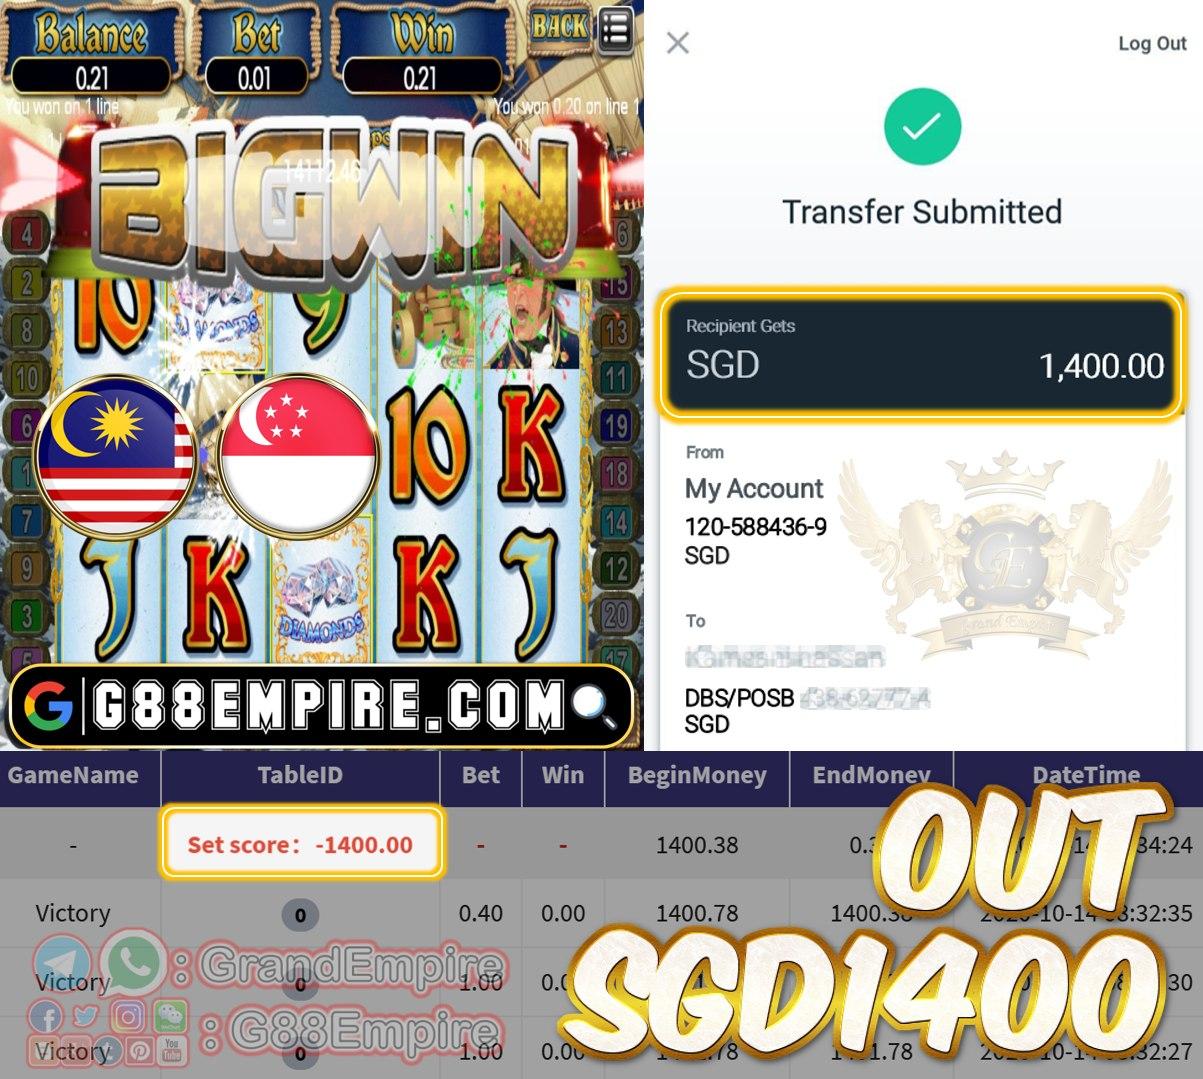 MEMBER MAIN VICTORY OUT SGD1400 !!!